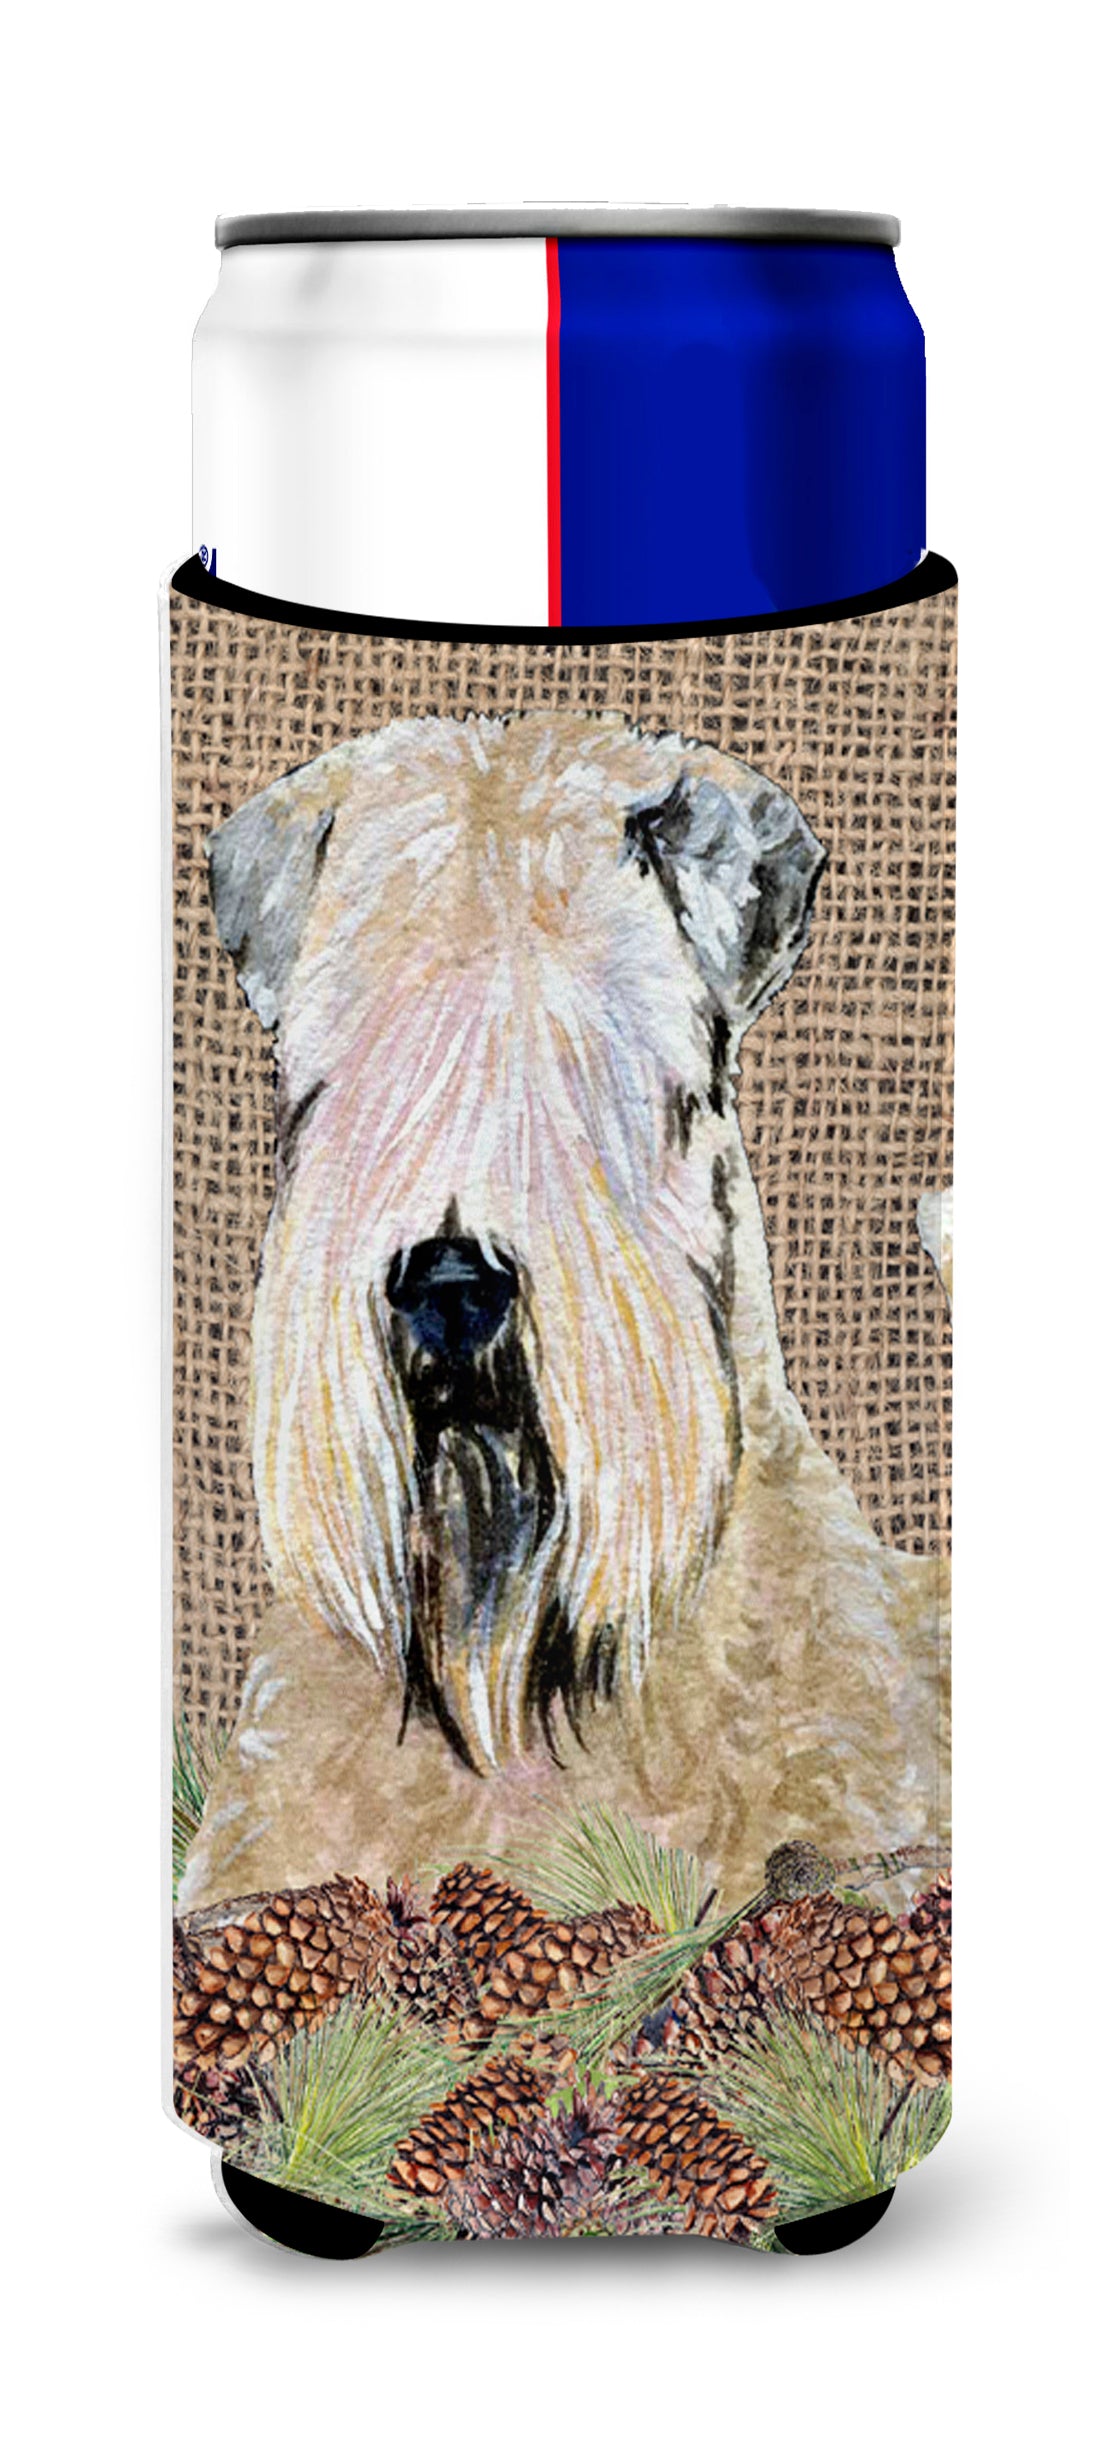 Wheaten Terrier Soft Coated on Faux Burlap with Pine Cones Ultra Beverage Insulators for slim cans SS4079MUK.